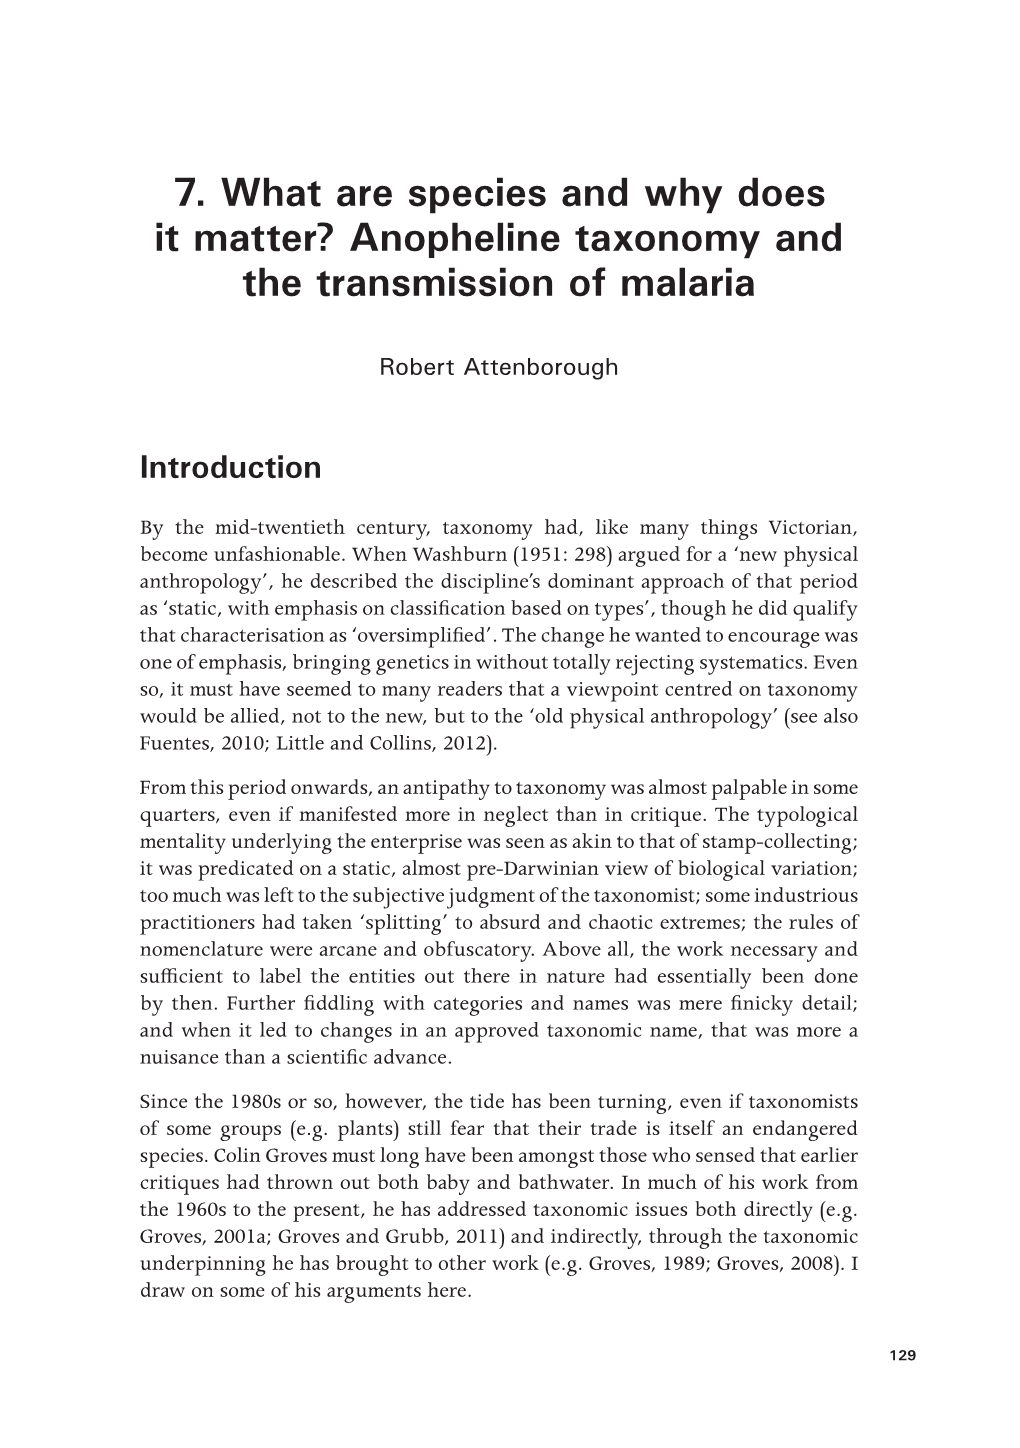 Anopheline Taxonomy and the Transmission of Malaria